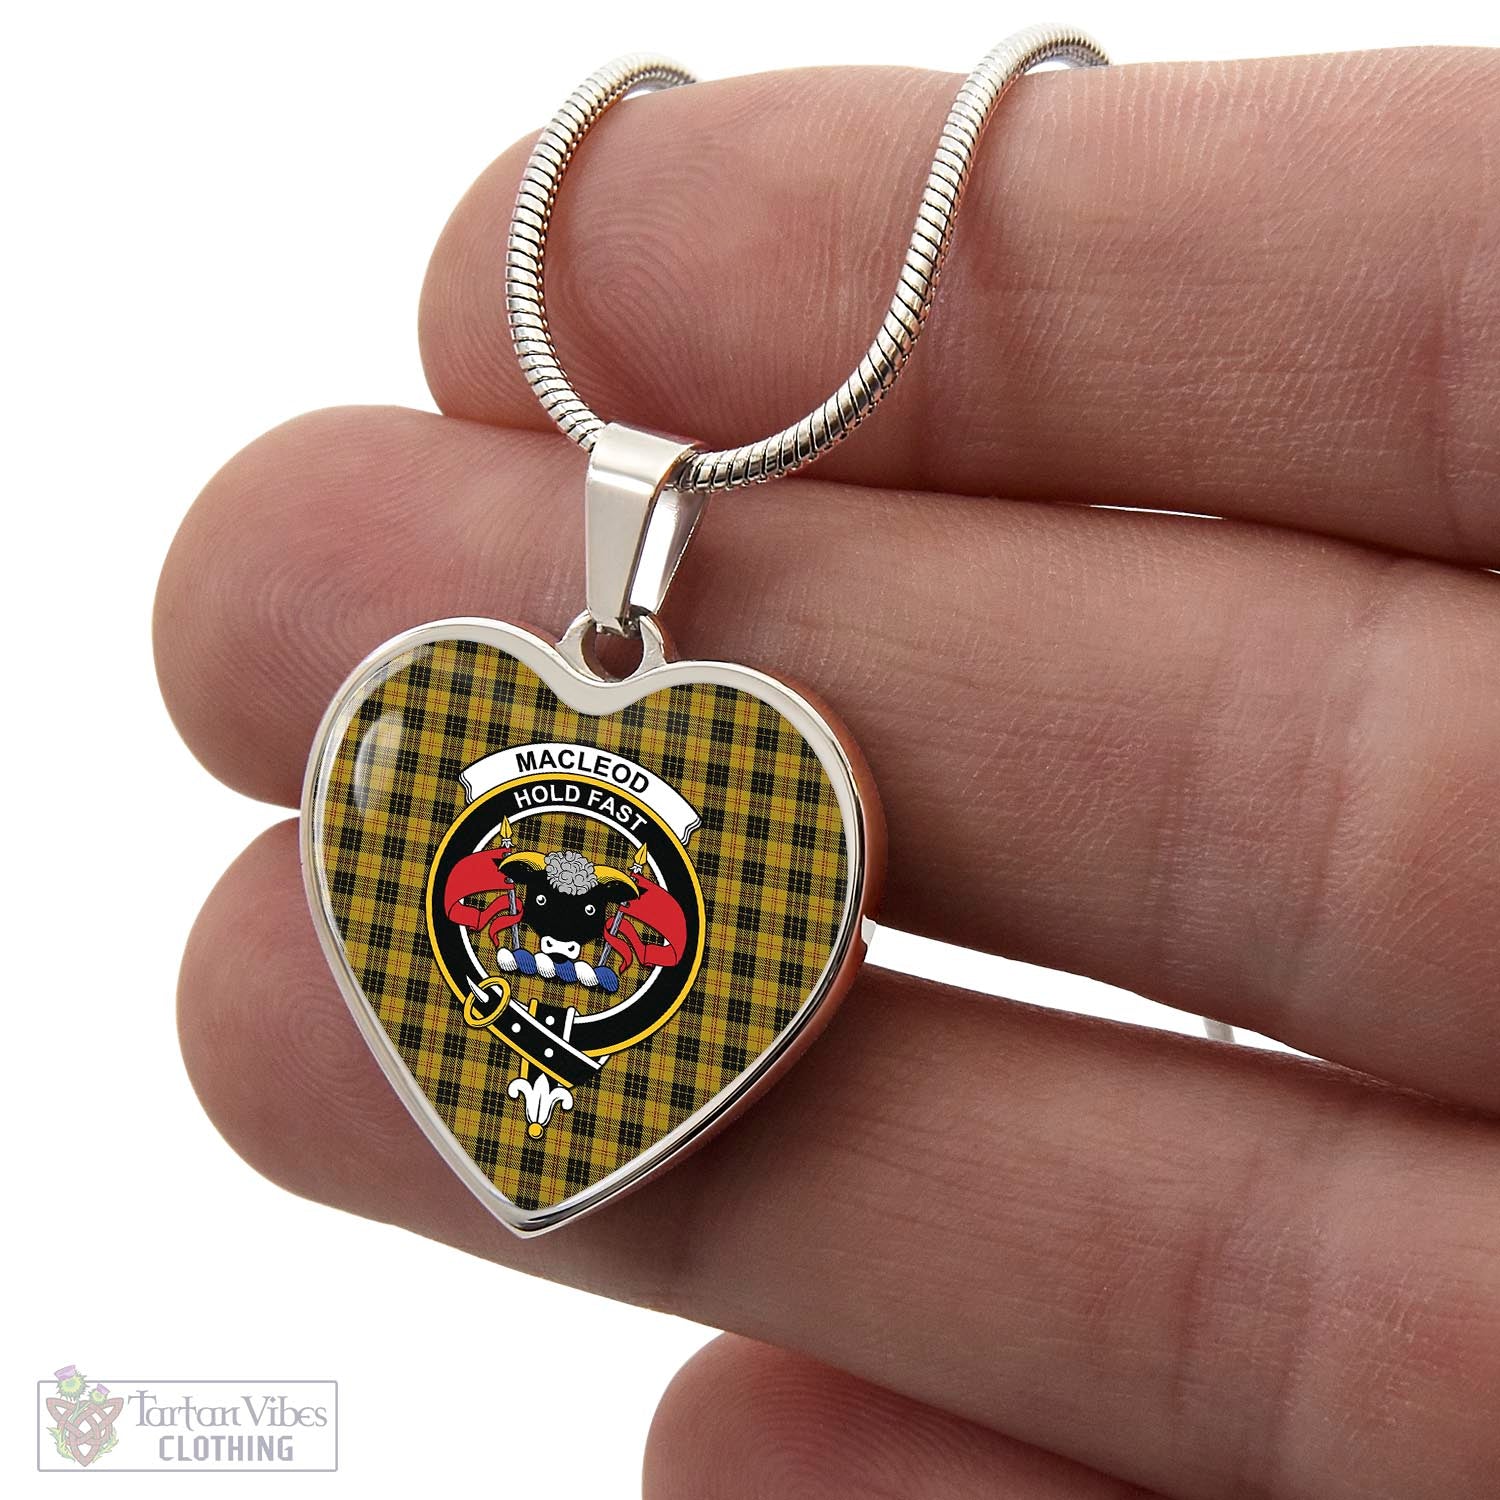 Tartan Vibes Clothing MacLeod Tartan Heart Necklace with Family Crest